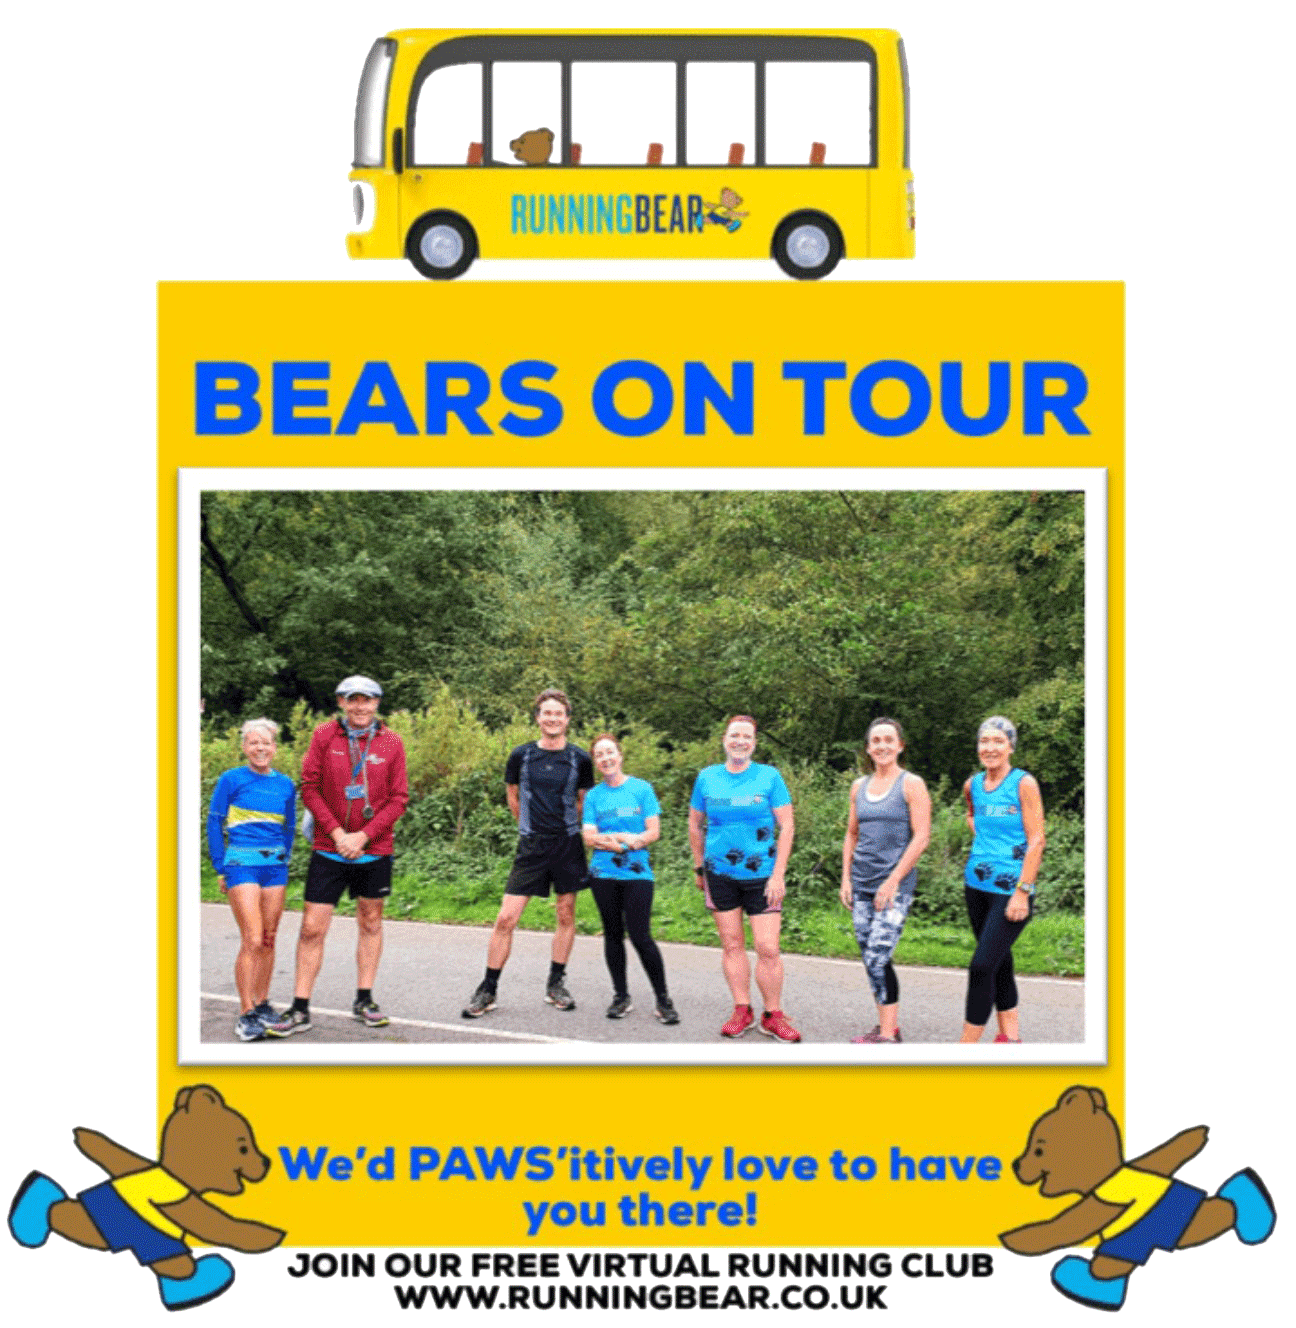 Run with RBRC Bears on Tour